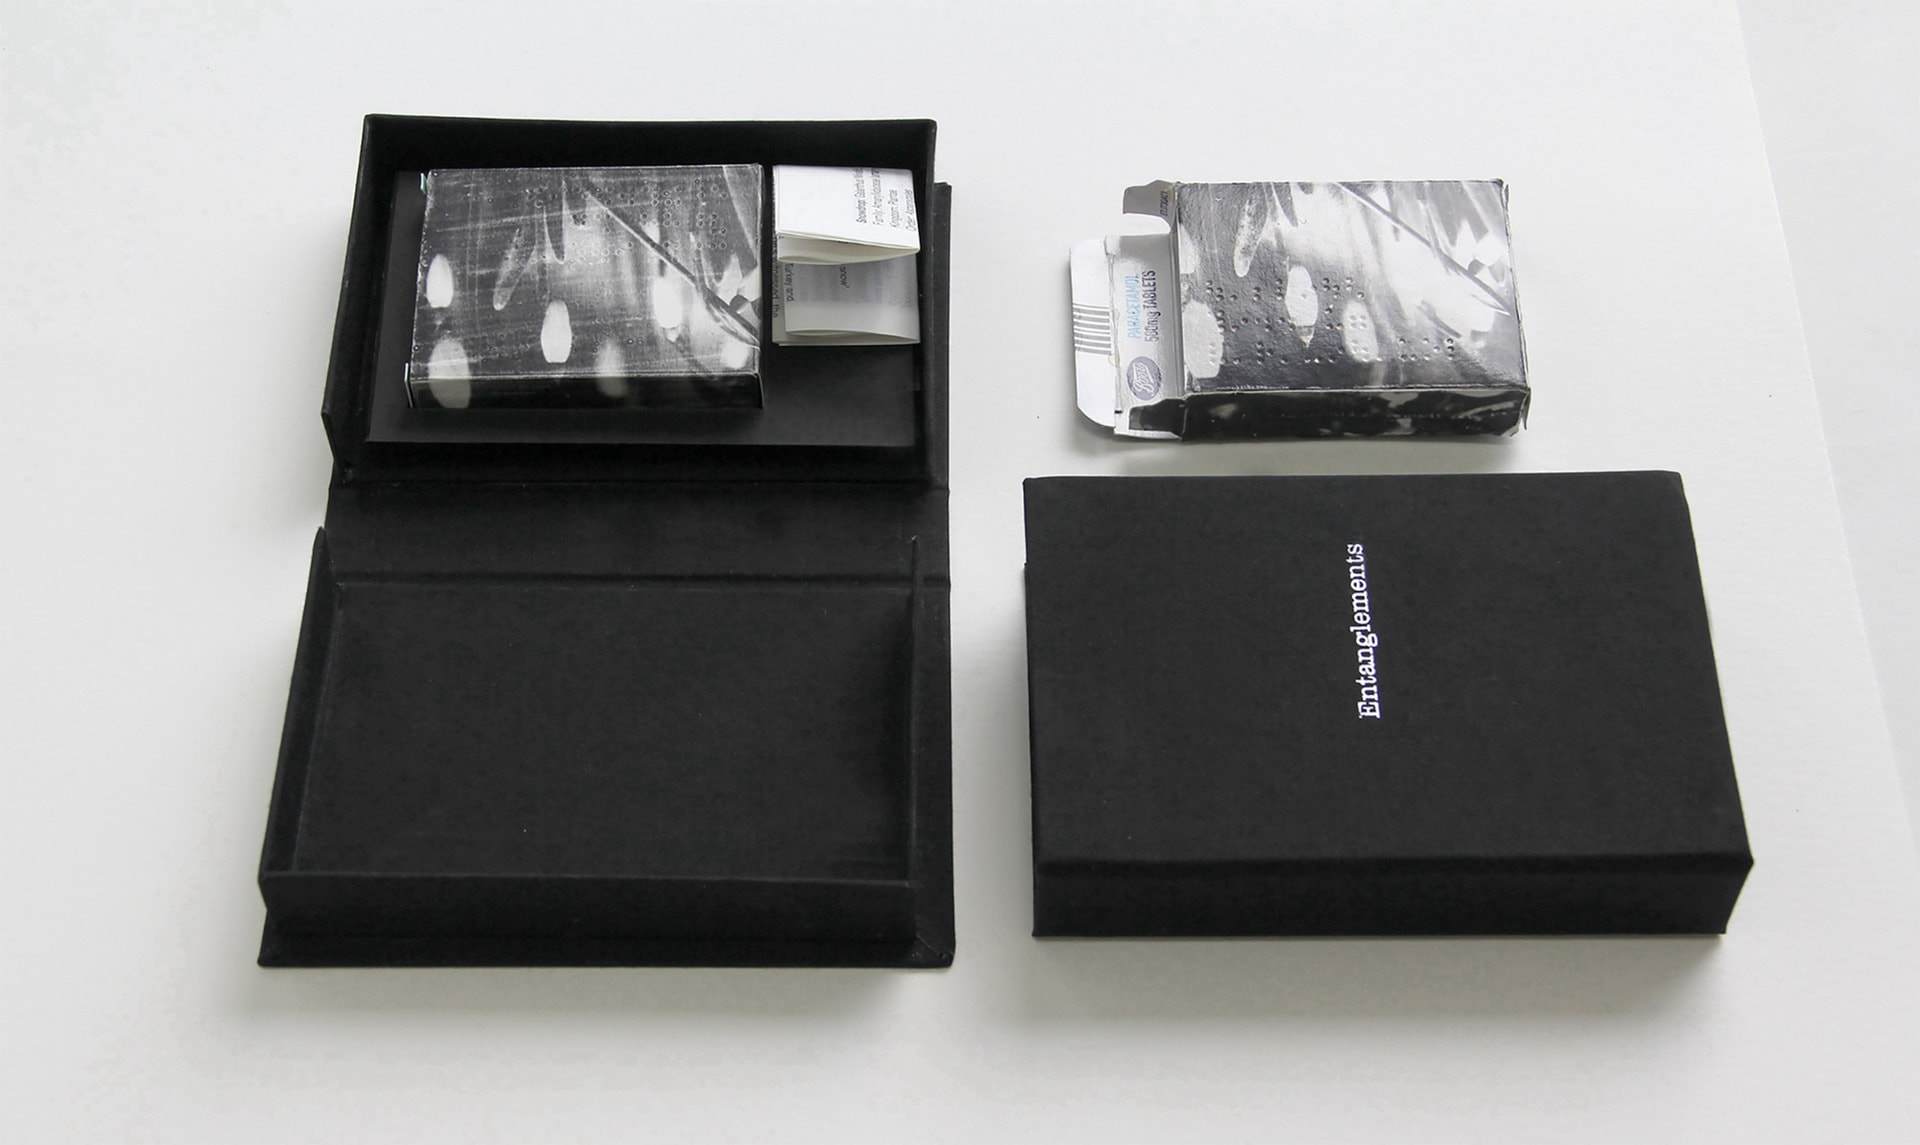 two black clamshell boxes containing recycled paracetamol boxes printed with a snowdrop image, one is open